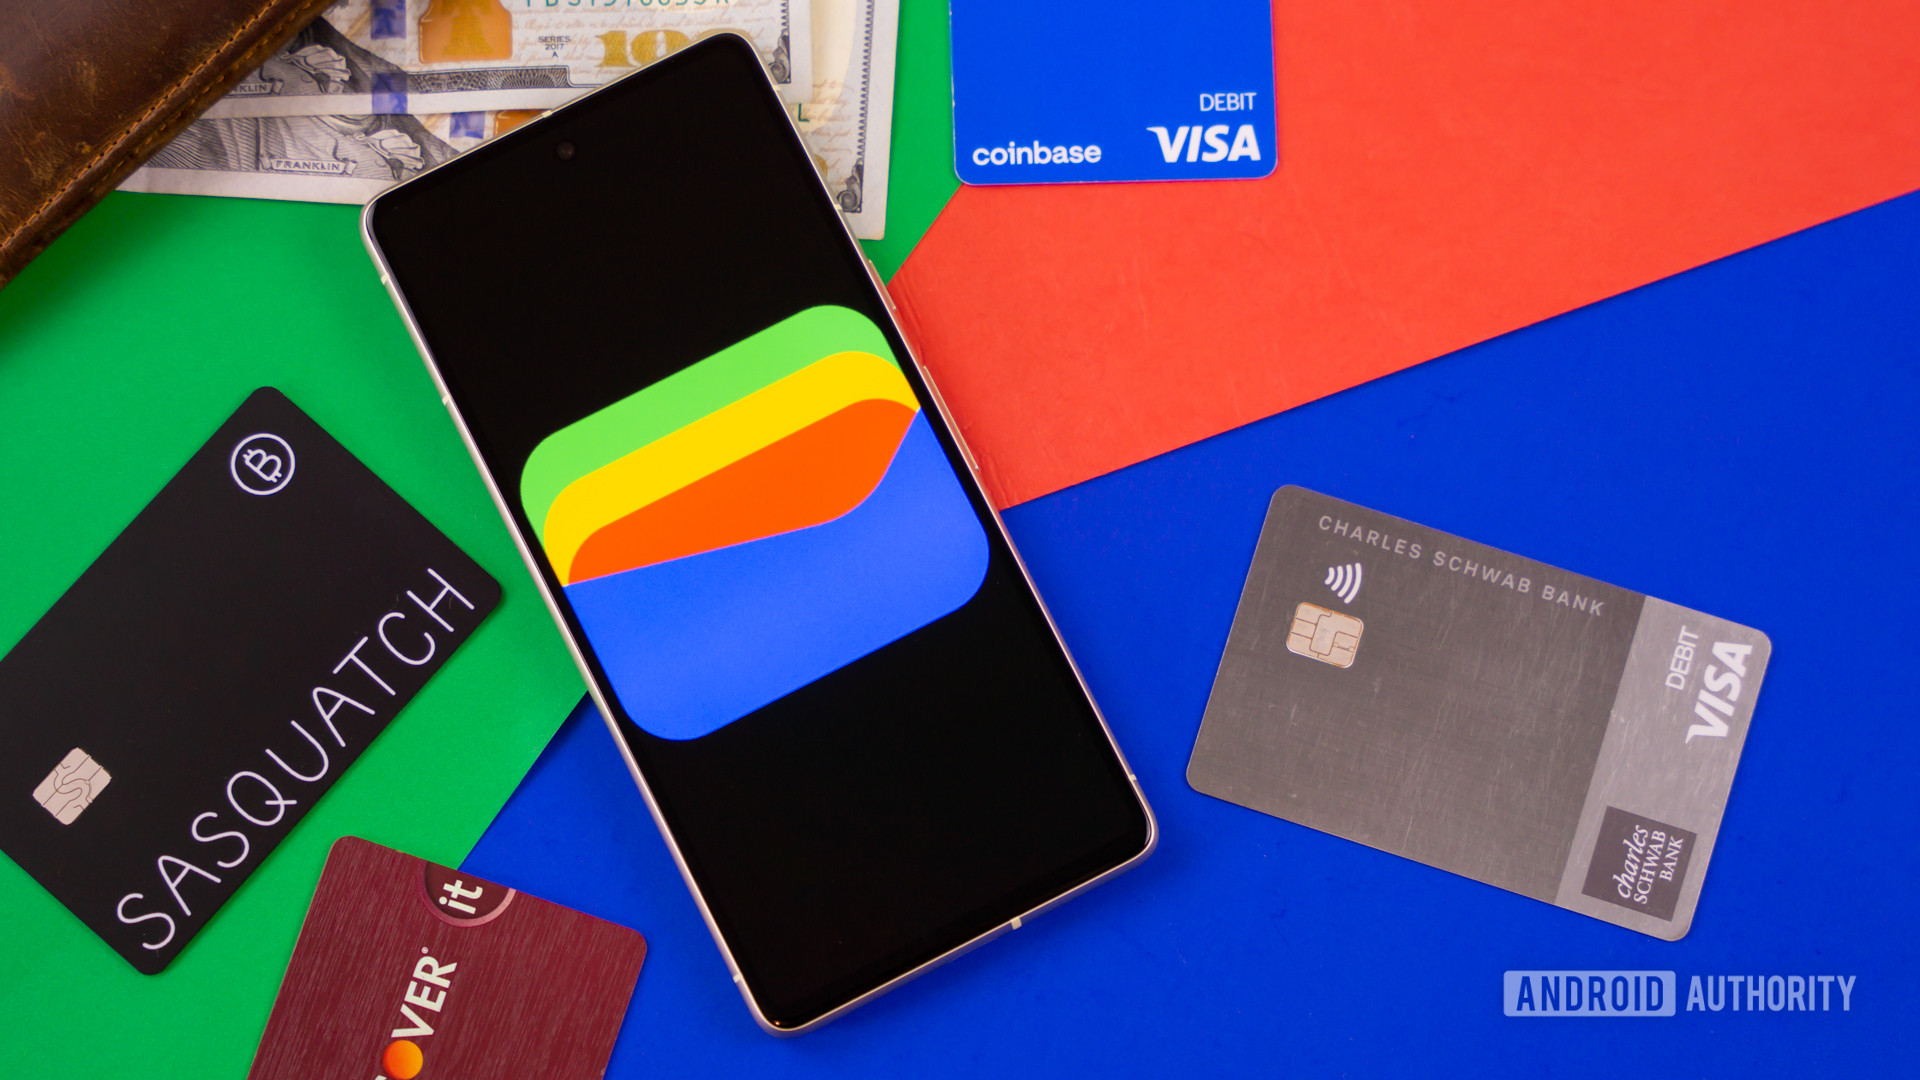 Google Wallet could soon add e-Passport support, but you’re still going to need the real thing